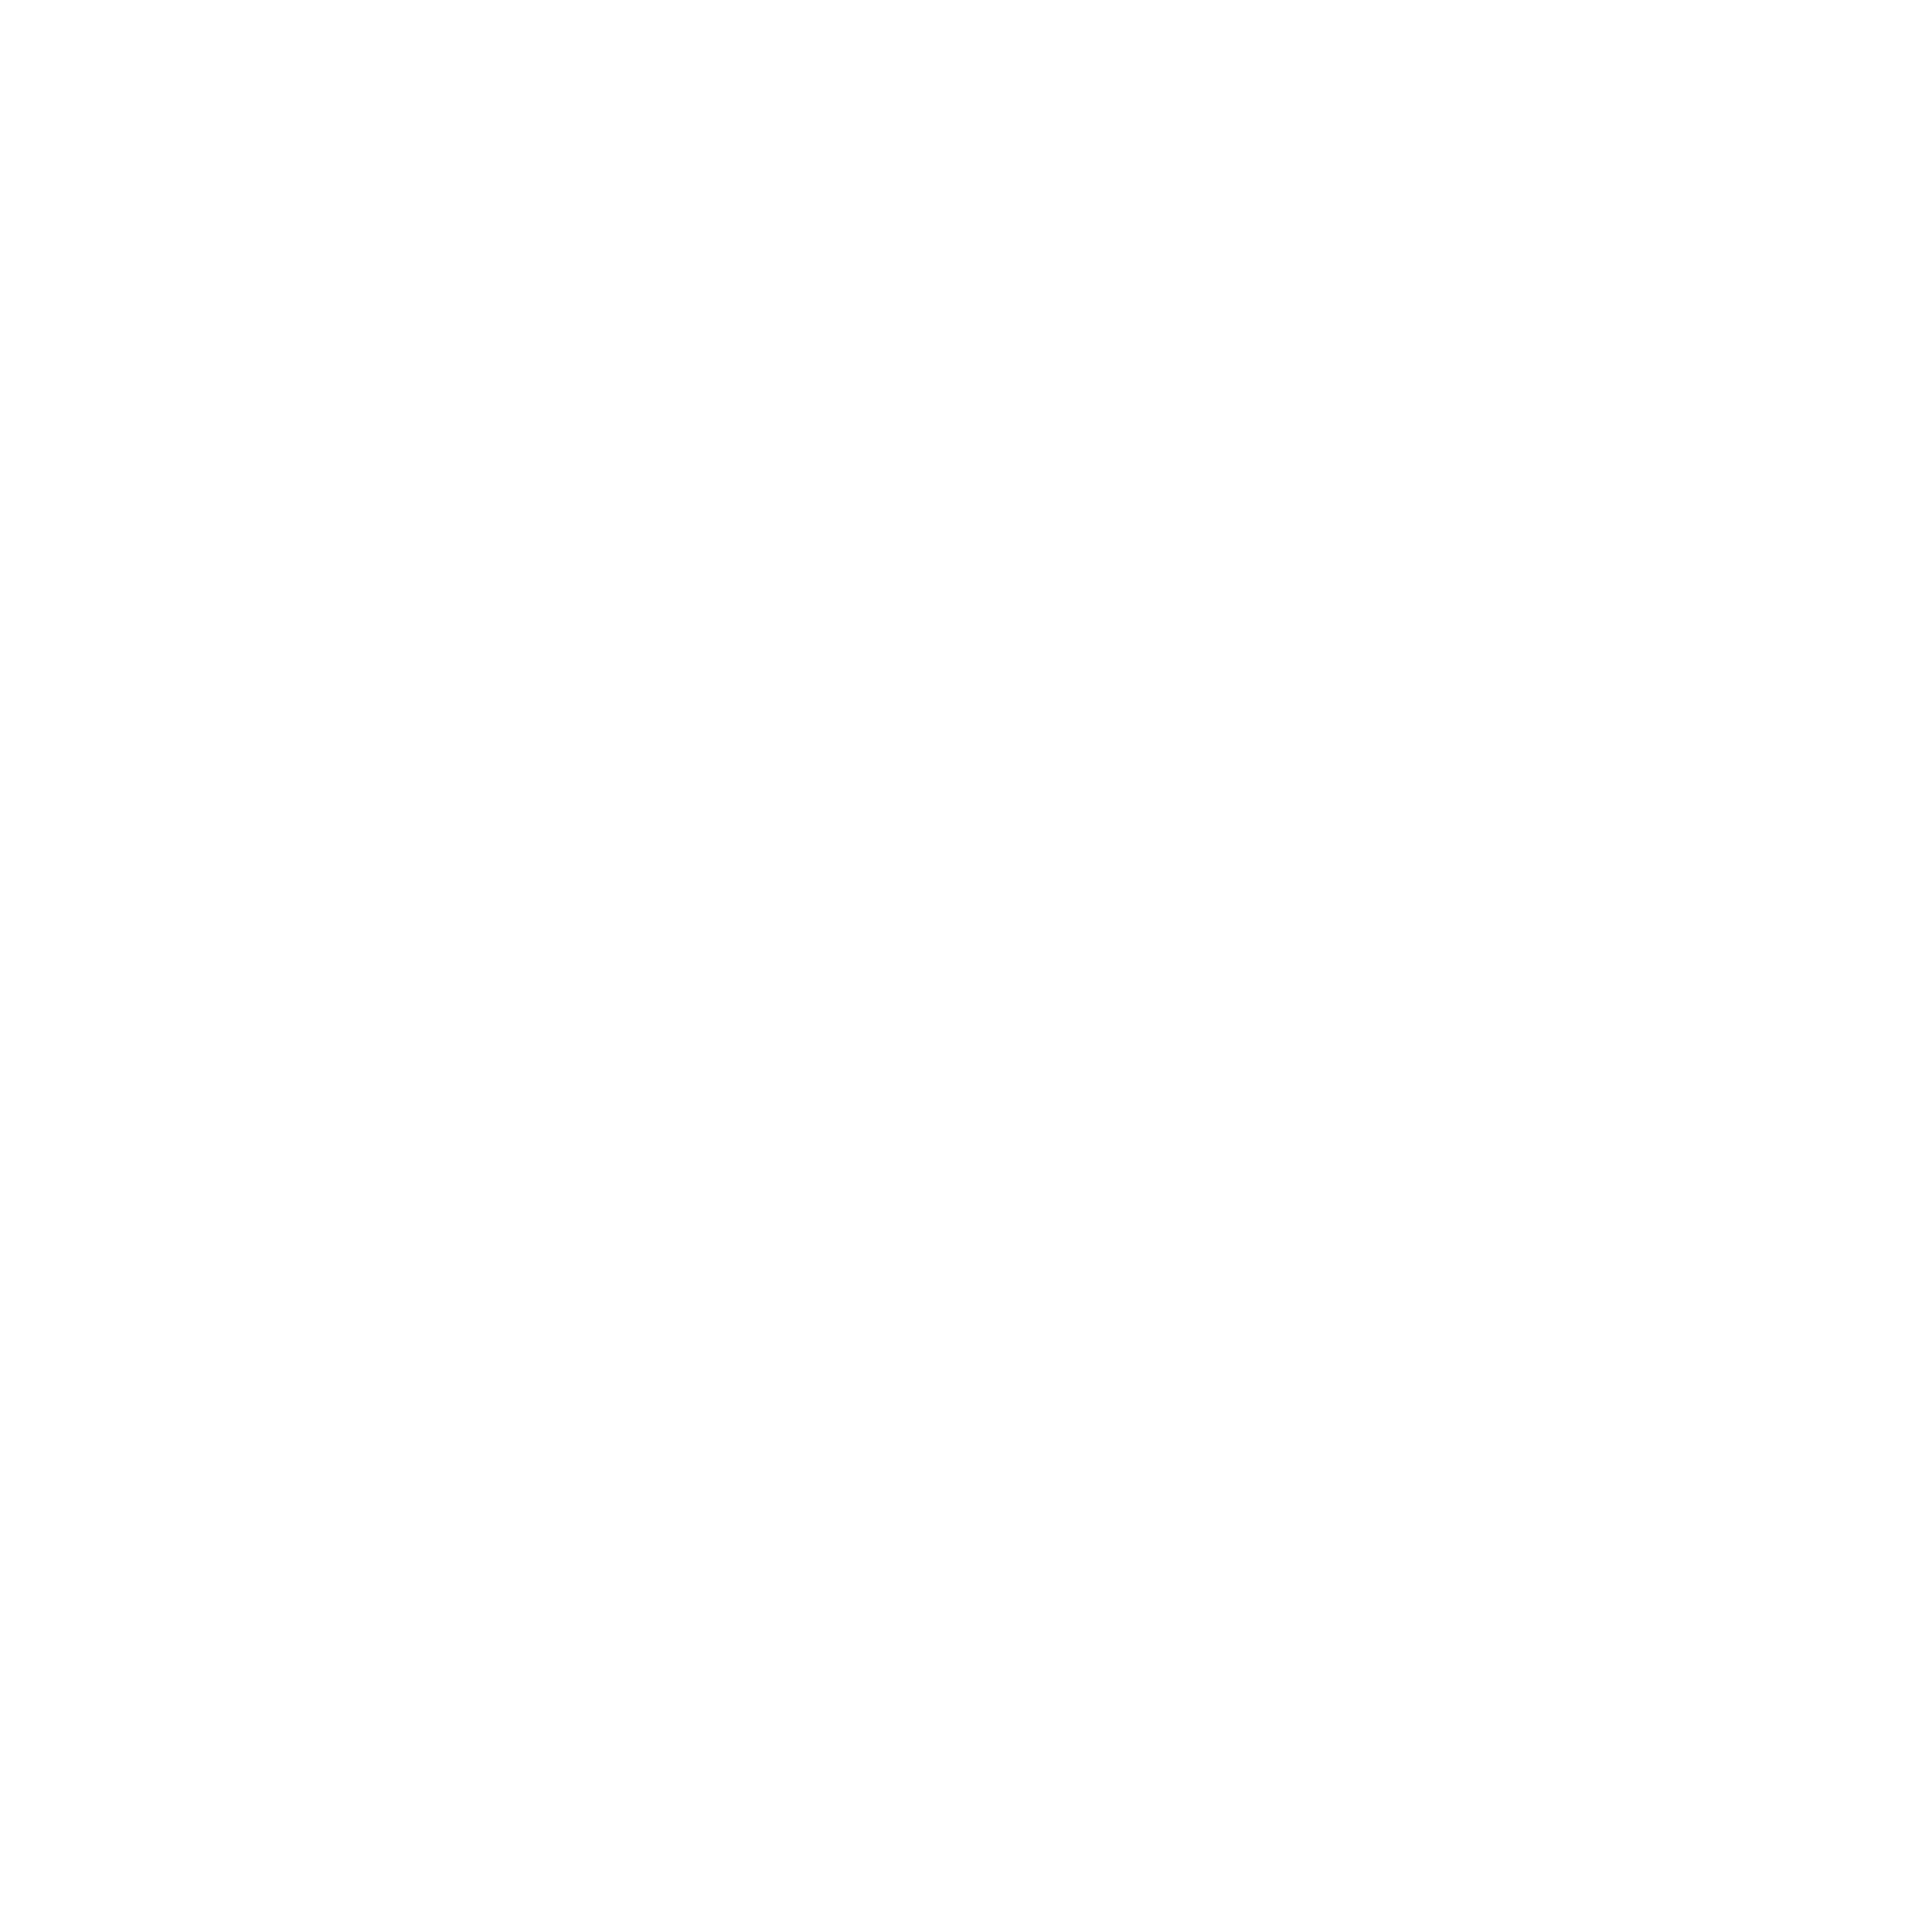 LunchTable logo